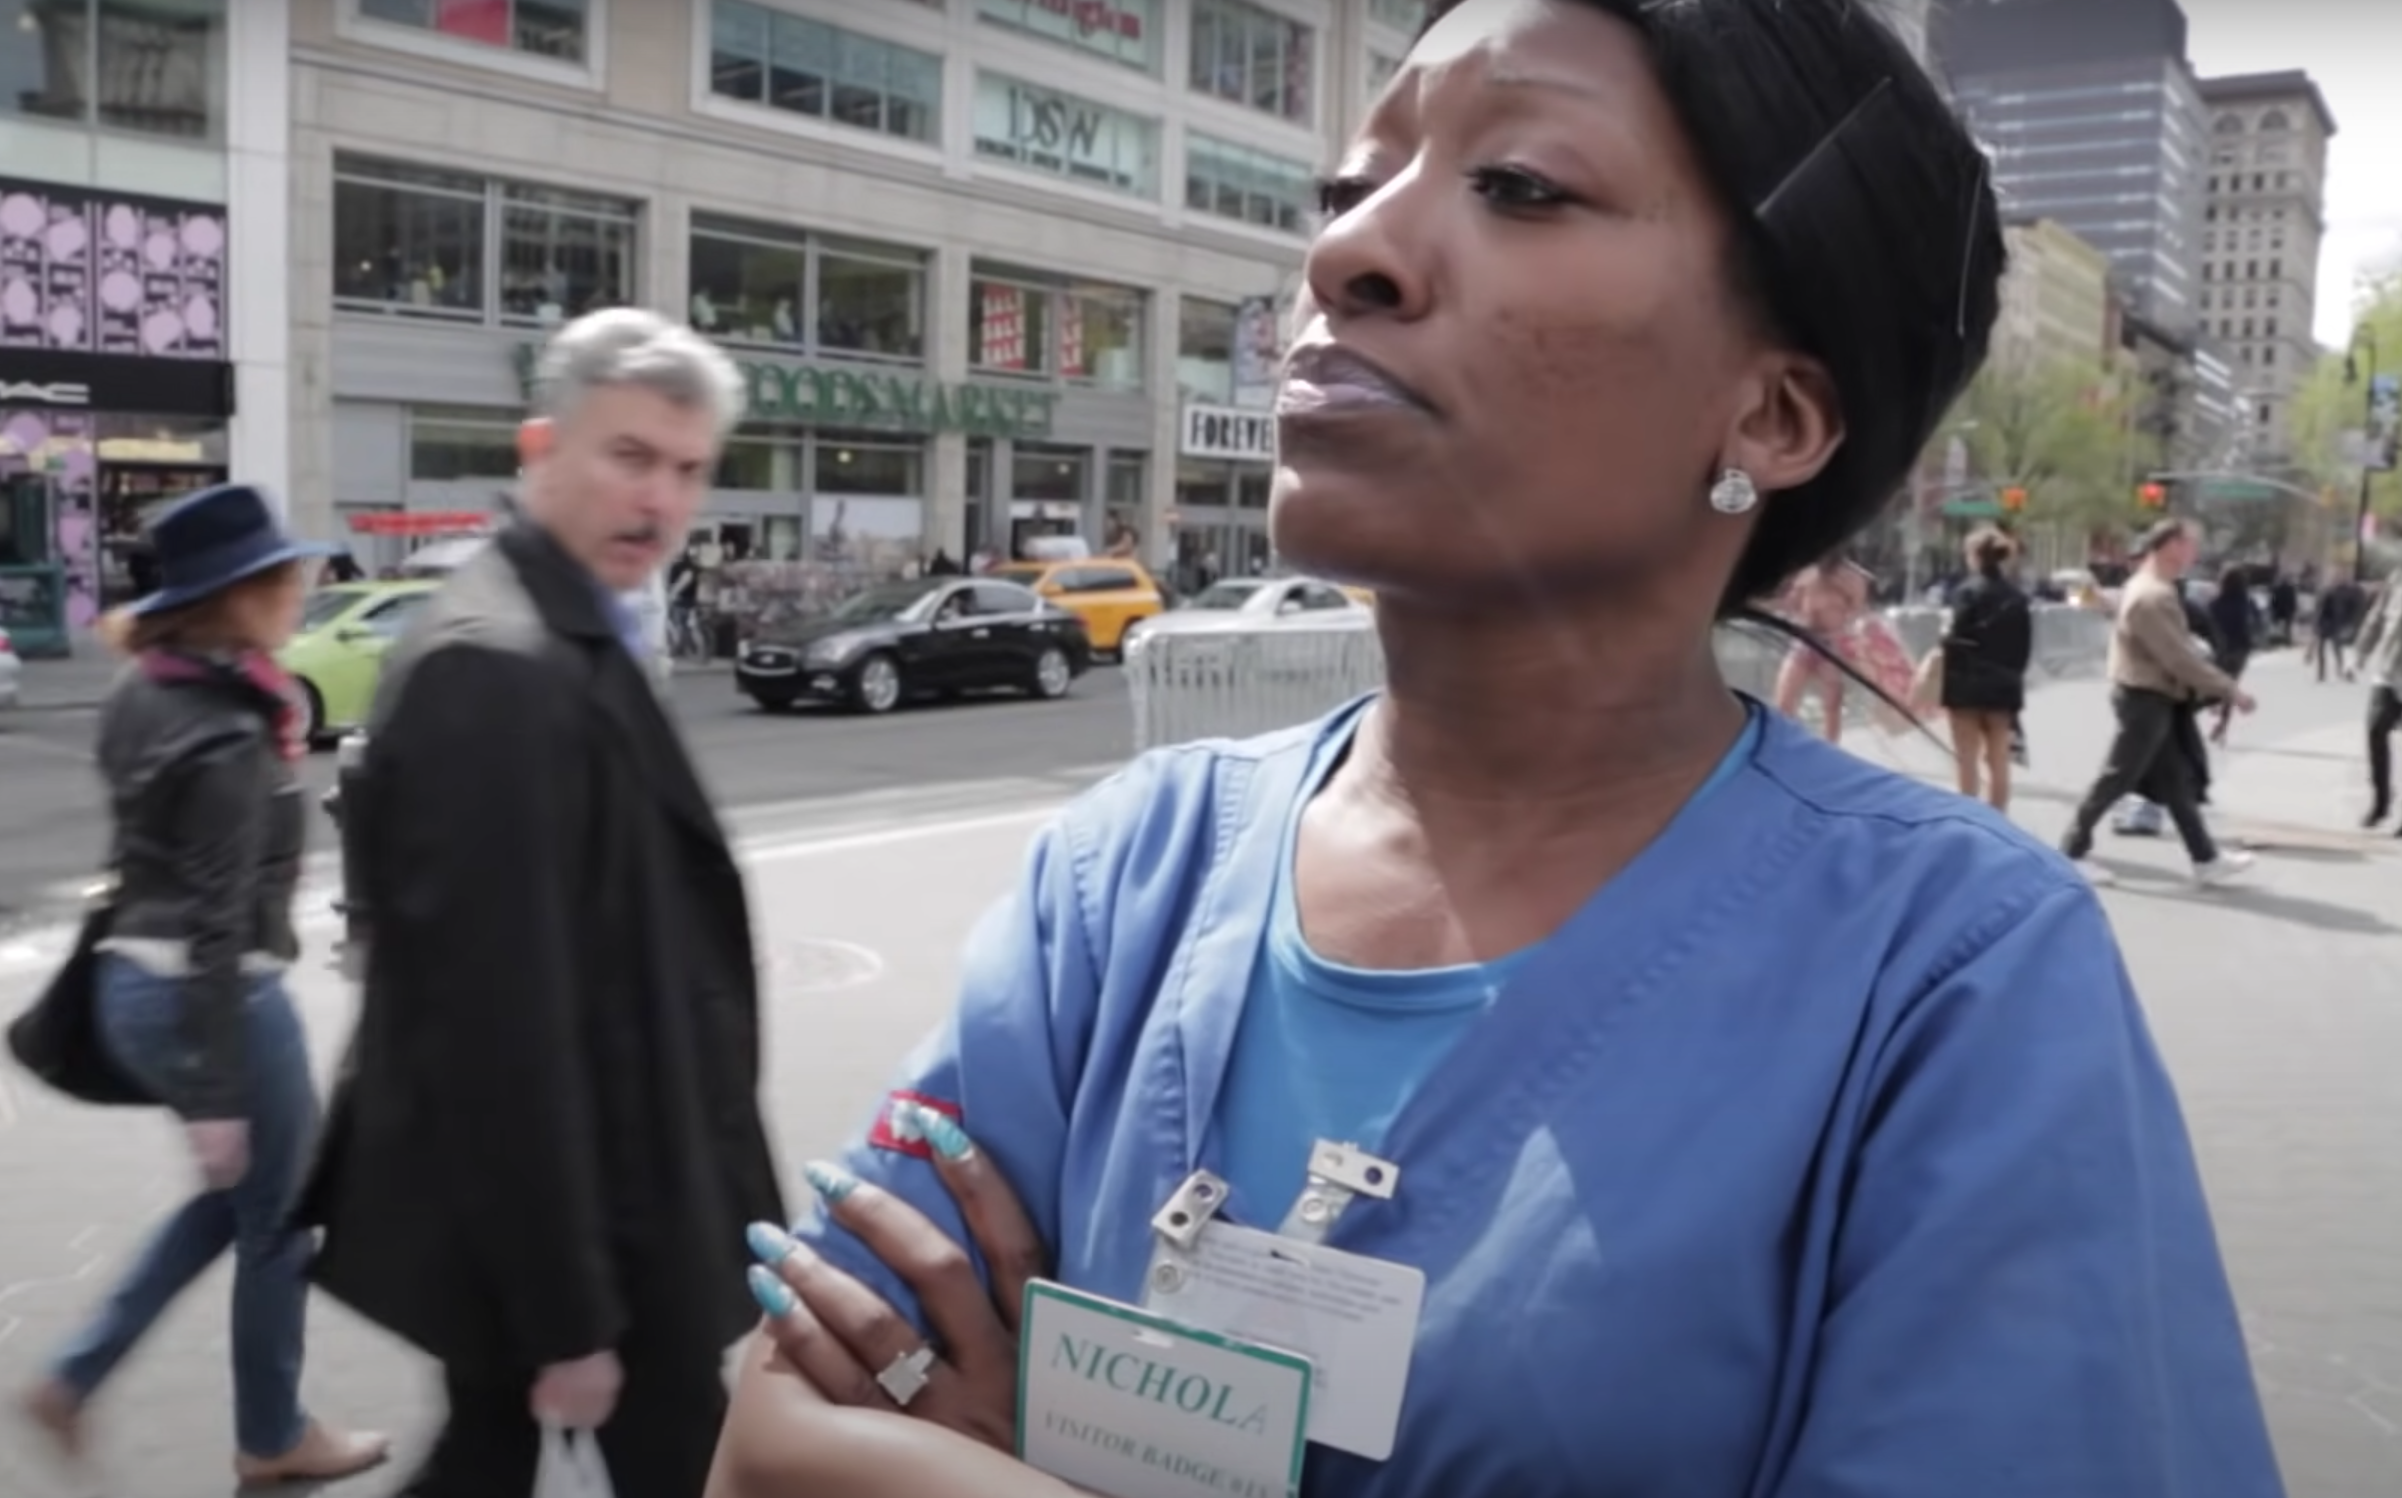 The Queen of Brooklyn is seen in a viral video.